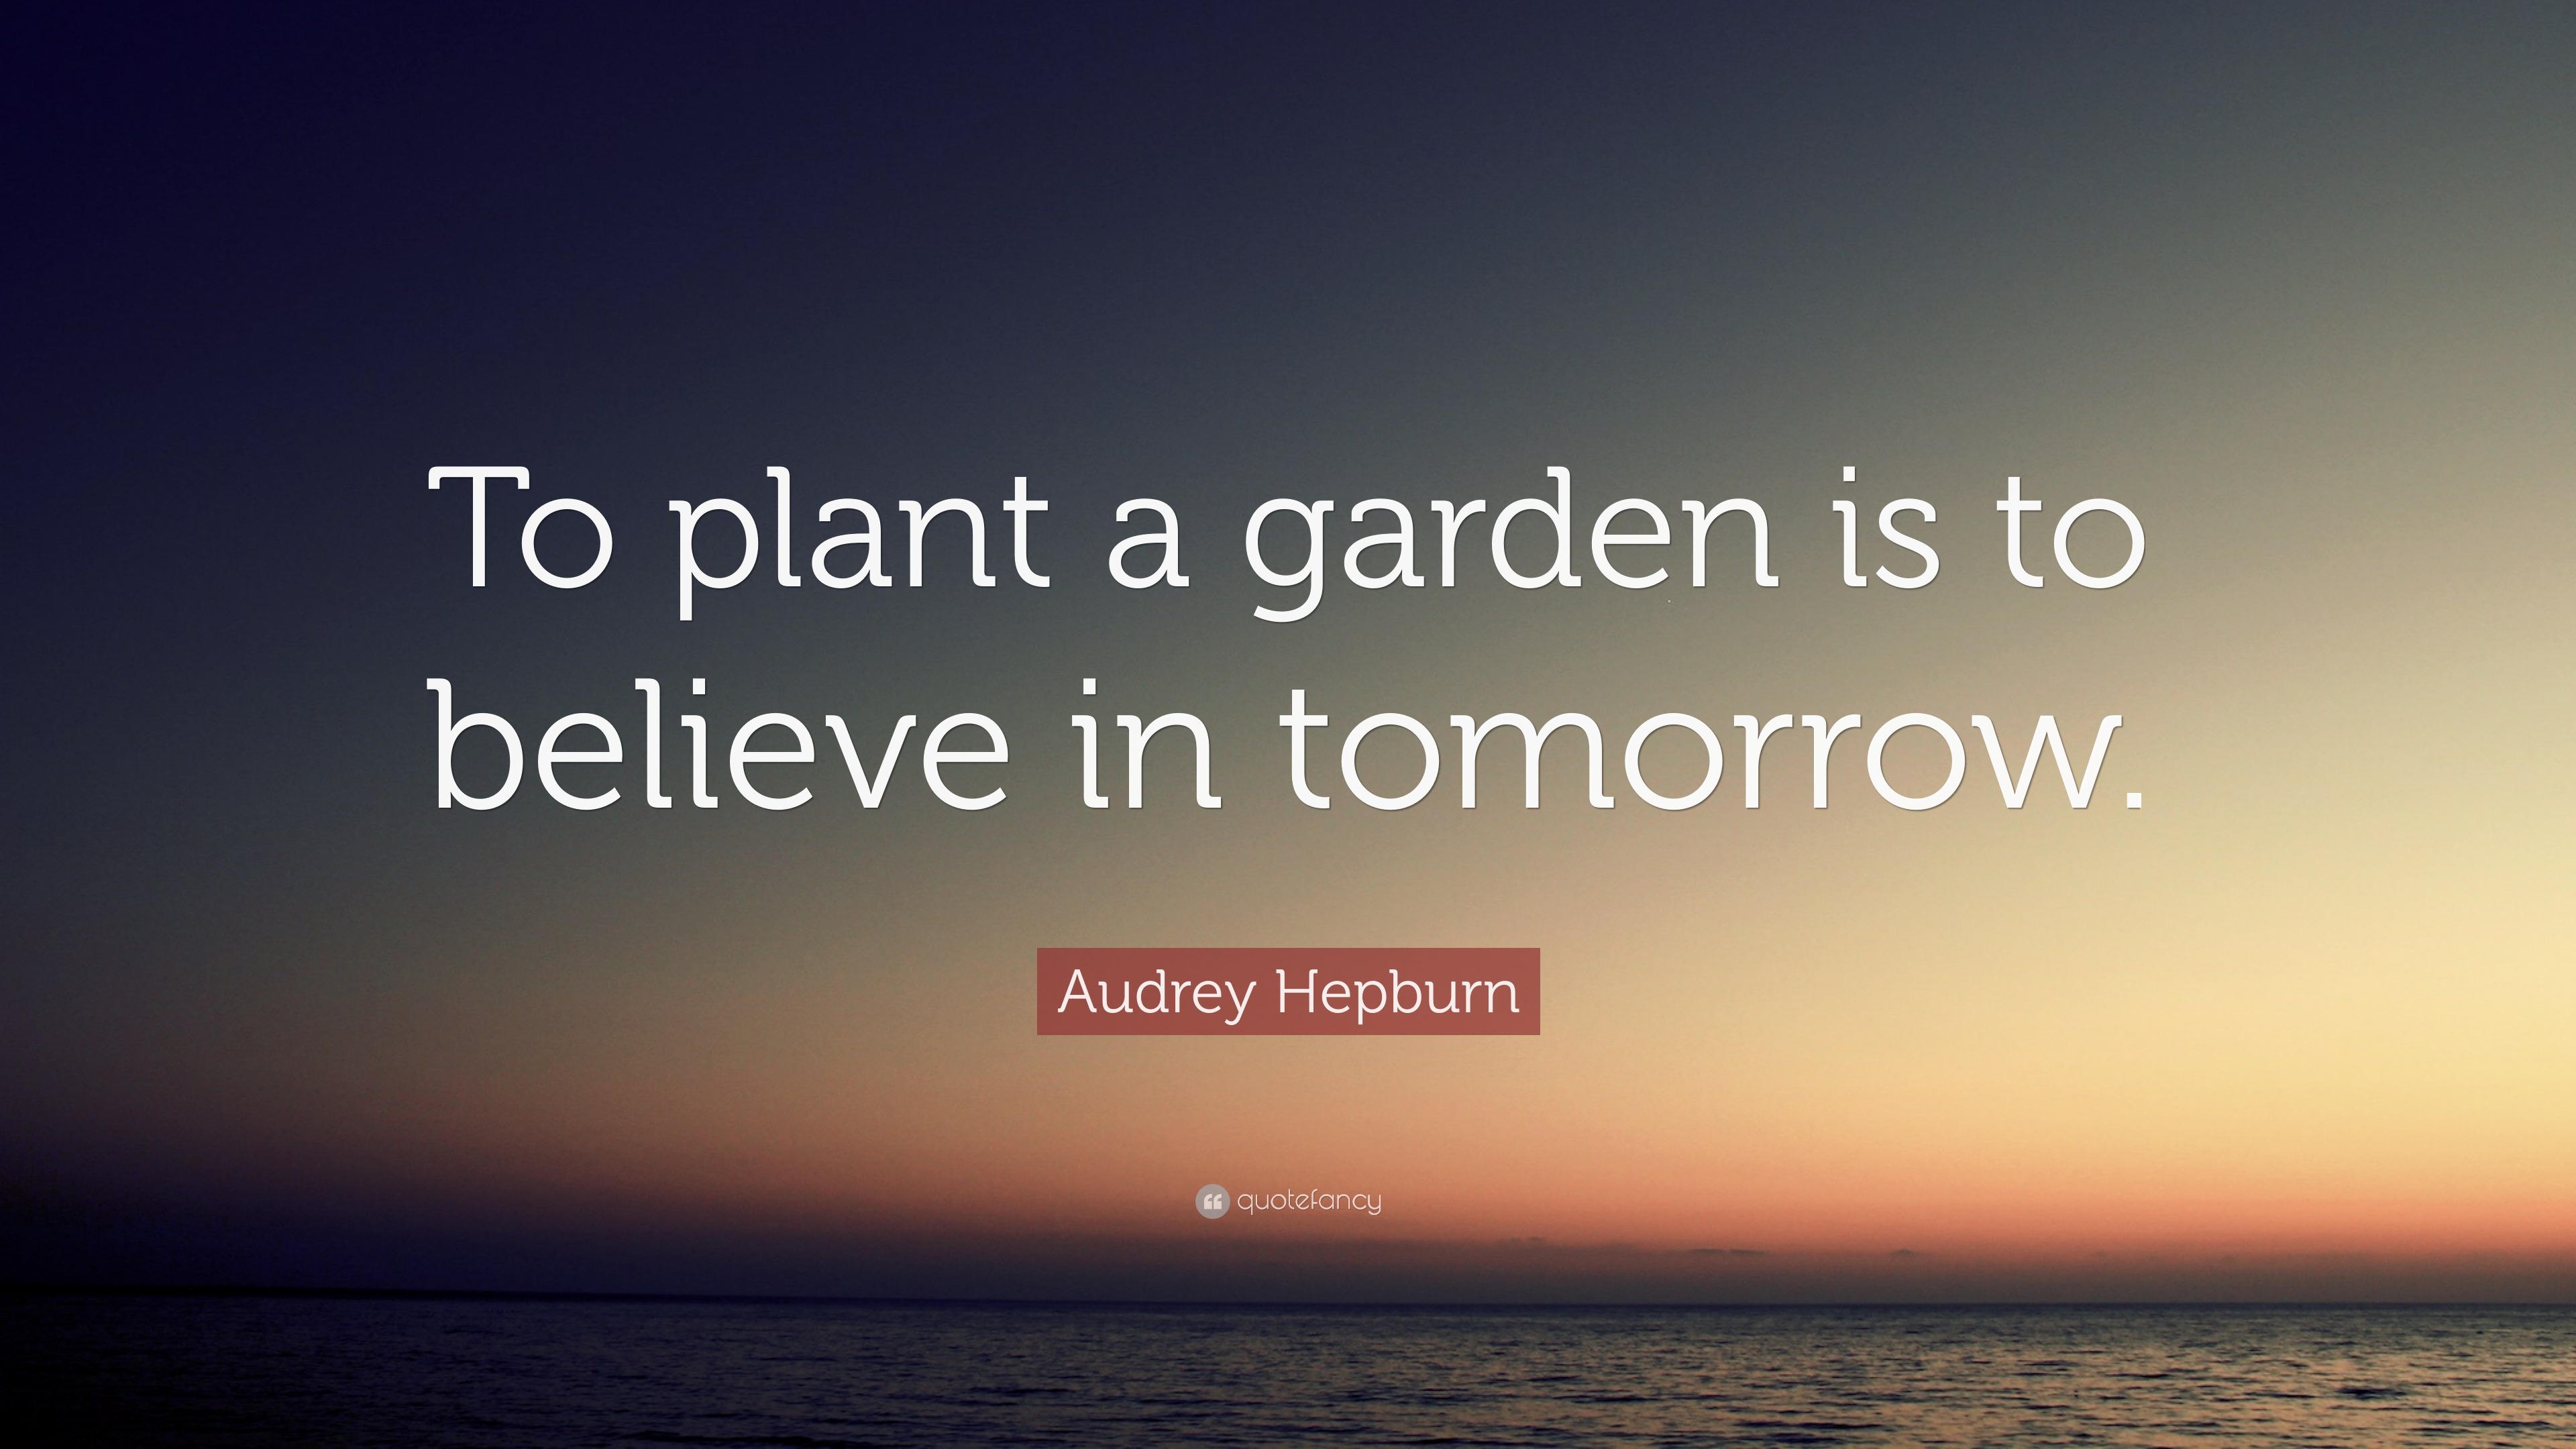 Audrey Hepburn Quote: “To plant a garden is to believe in tomorrow.”